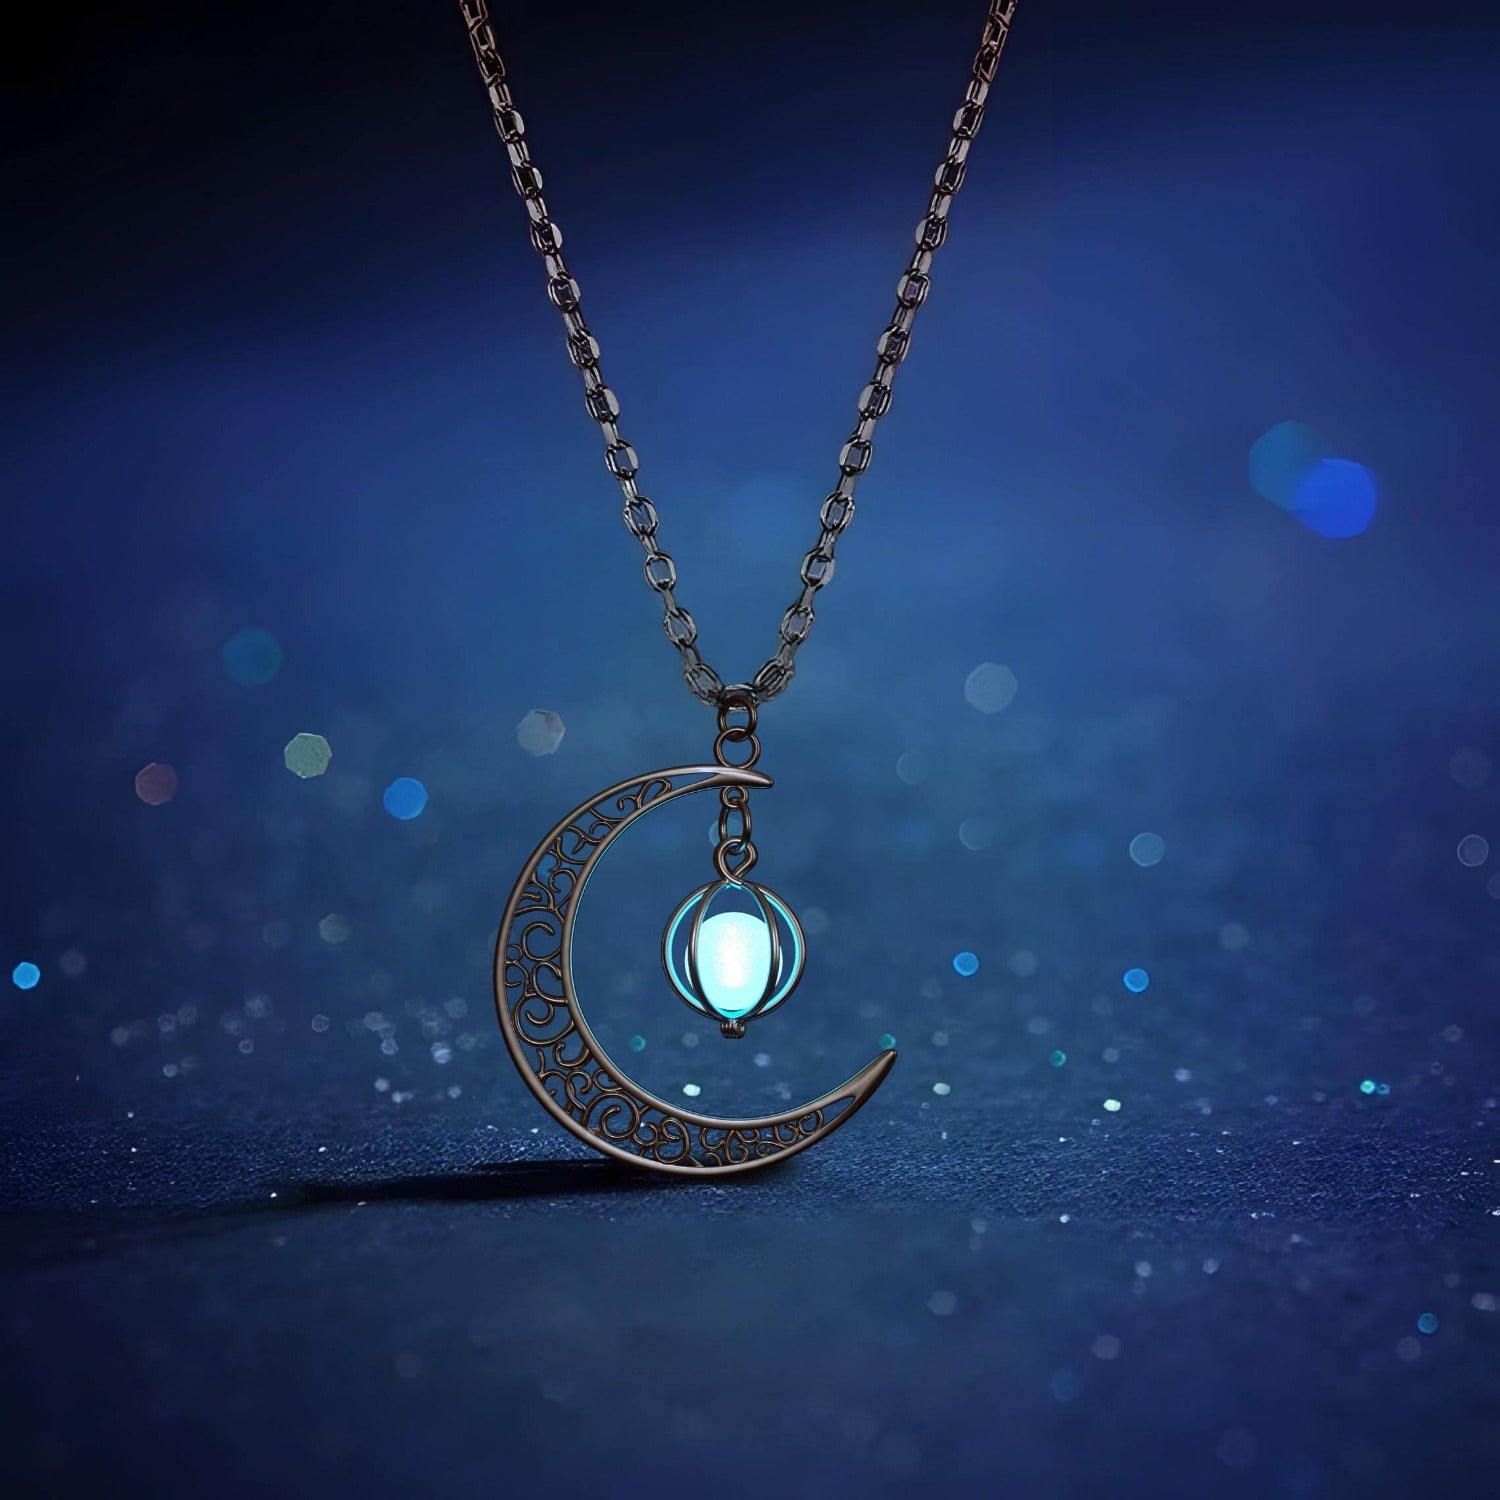 Enchanted Moonstone Necklace: Elegance with ethereal charm